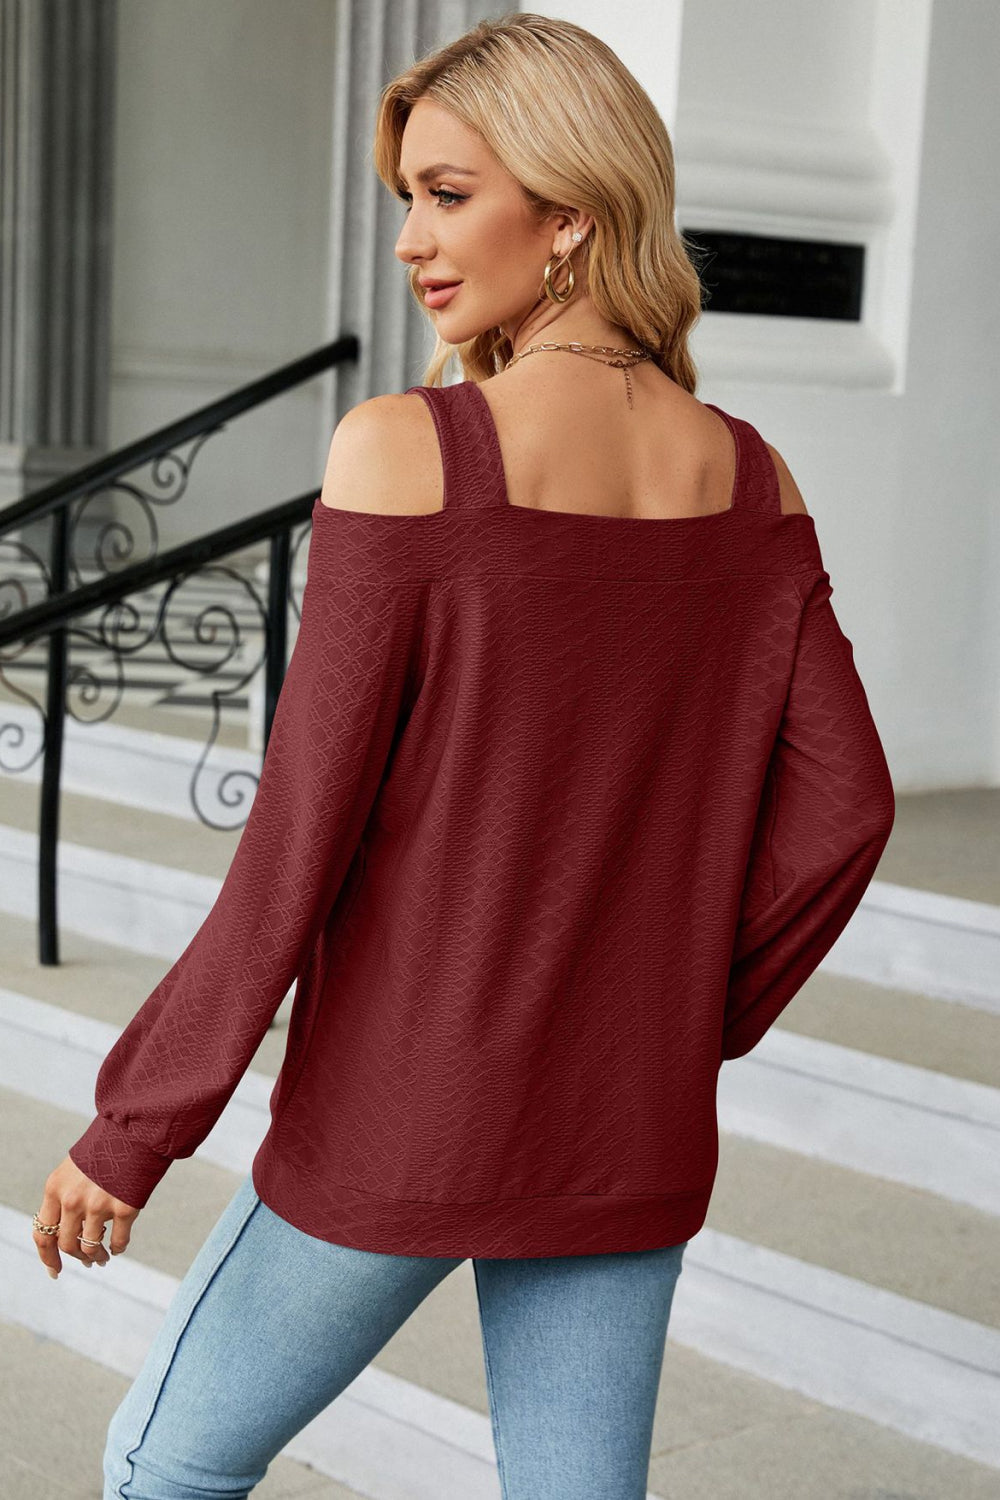 Cold Shoulder Square Neck Cutout Blouse - Women’s Clothing & Accessories - Shirts & Tops - 18 - 2024